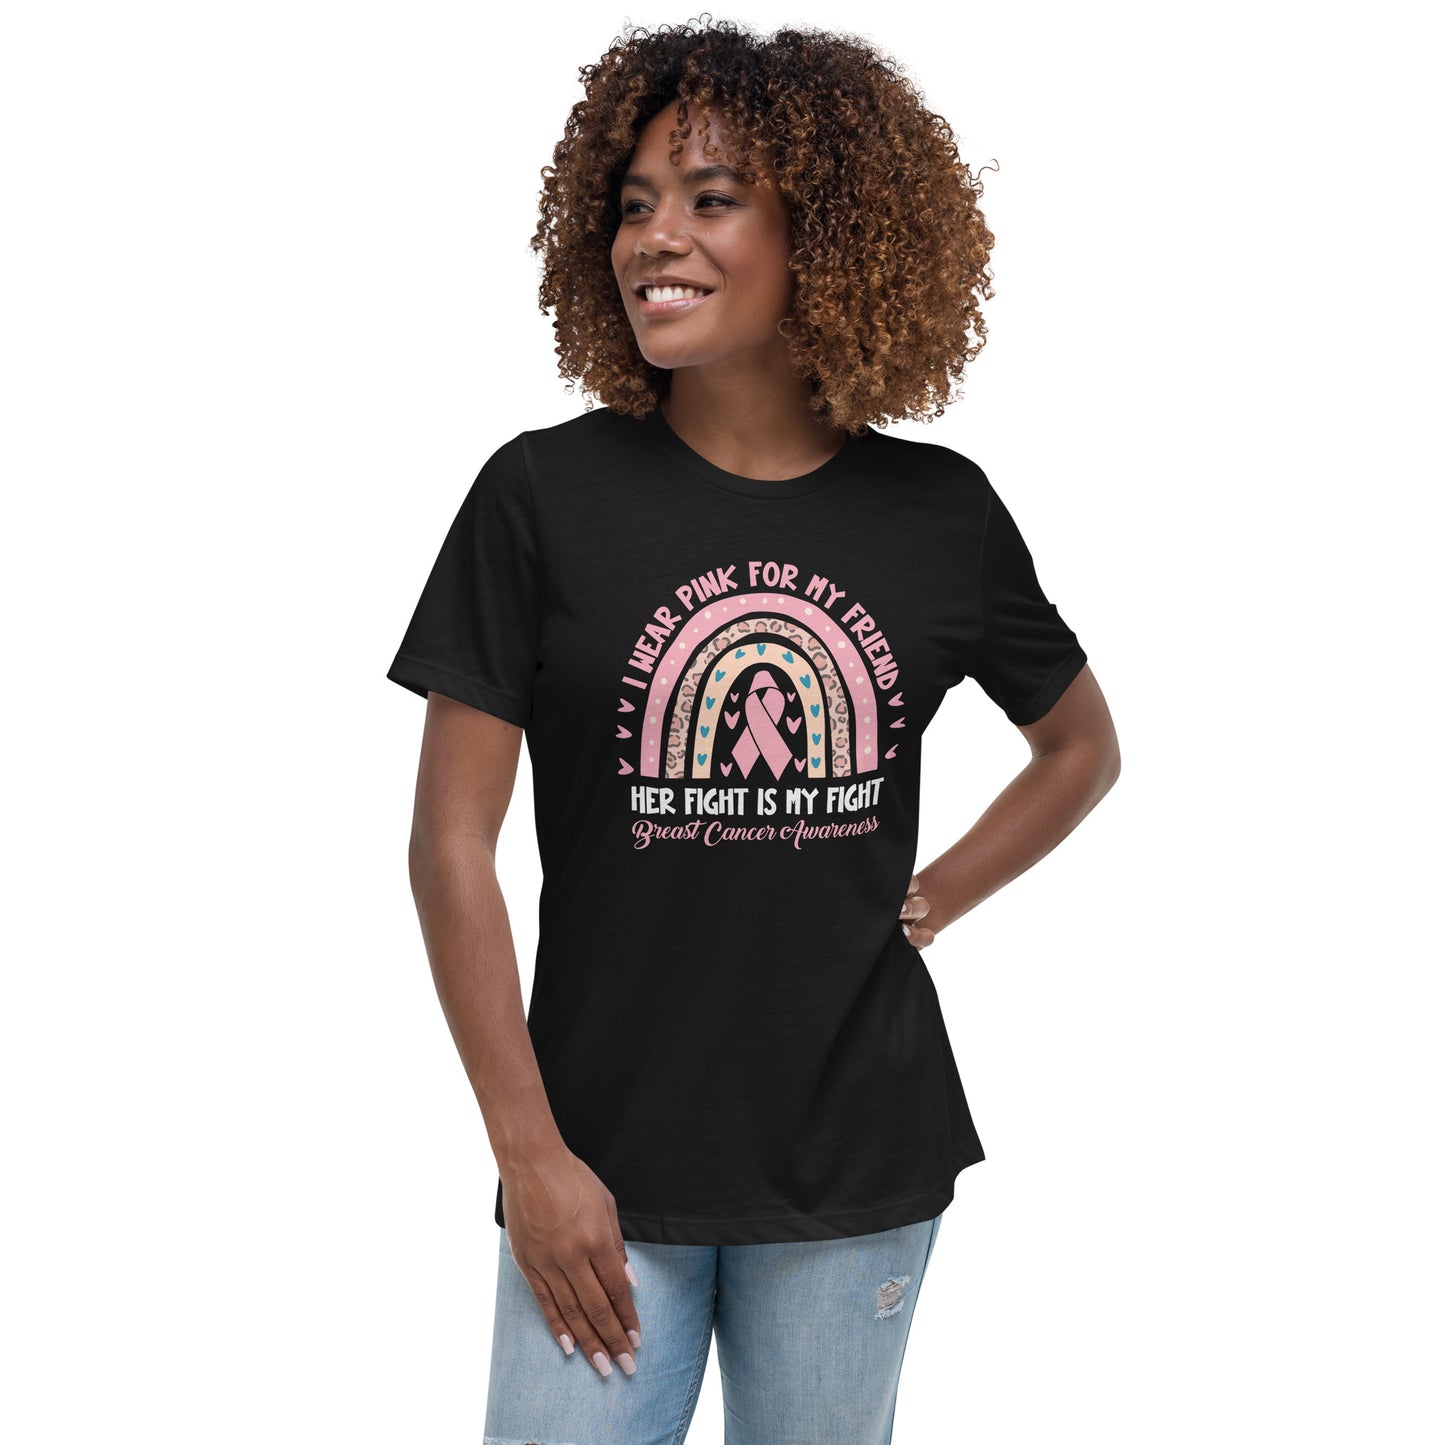 I Wear Pink for My Friend Women's Relaxed T-Shirt